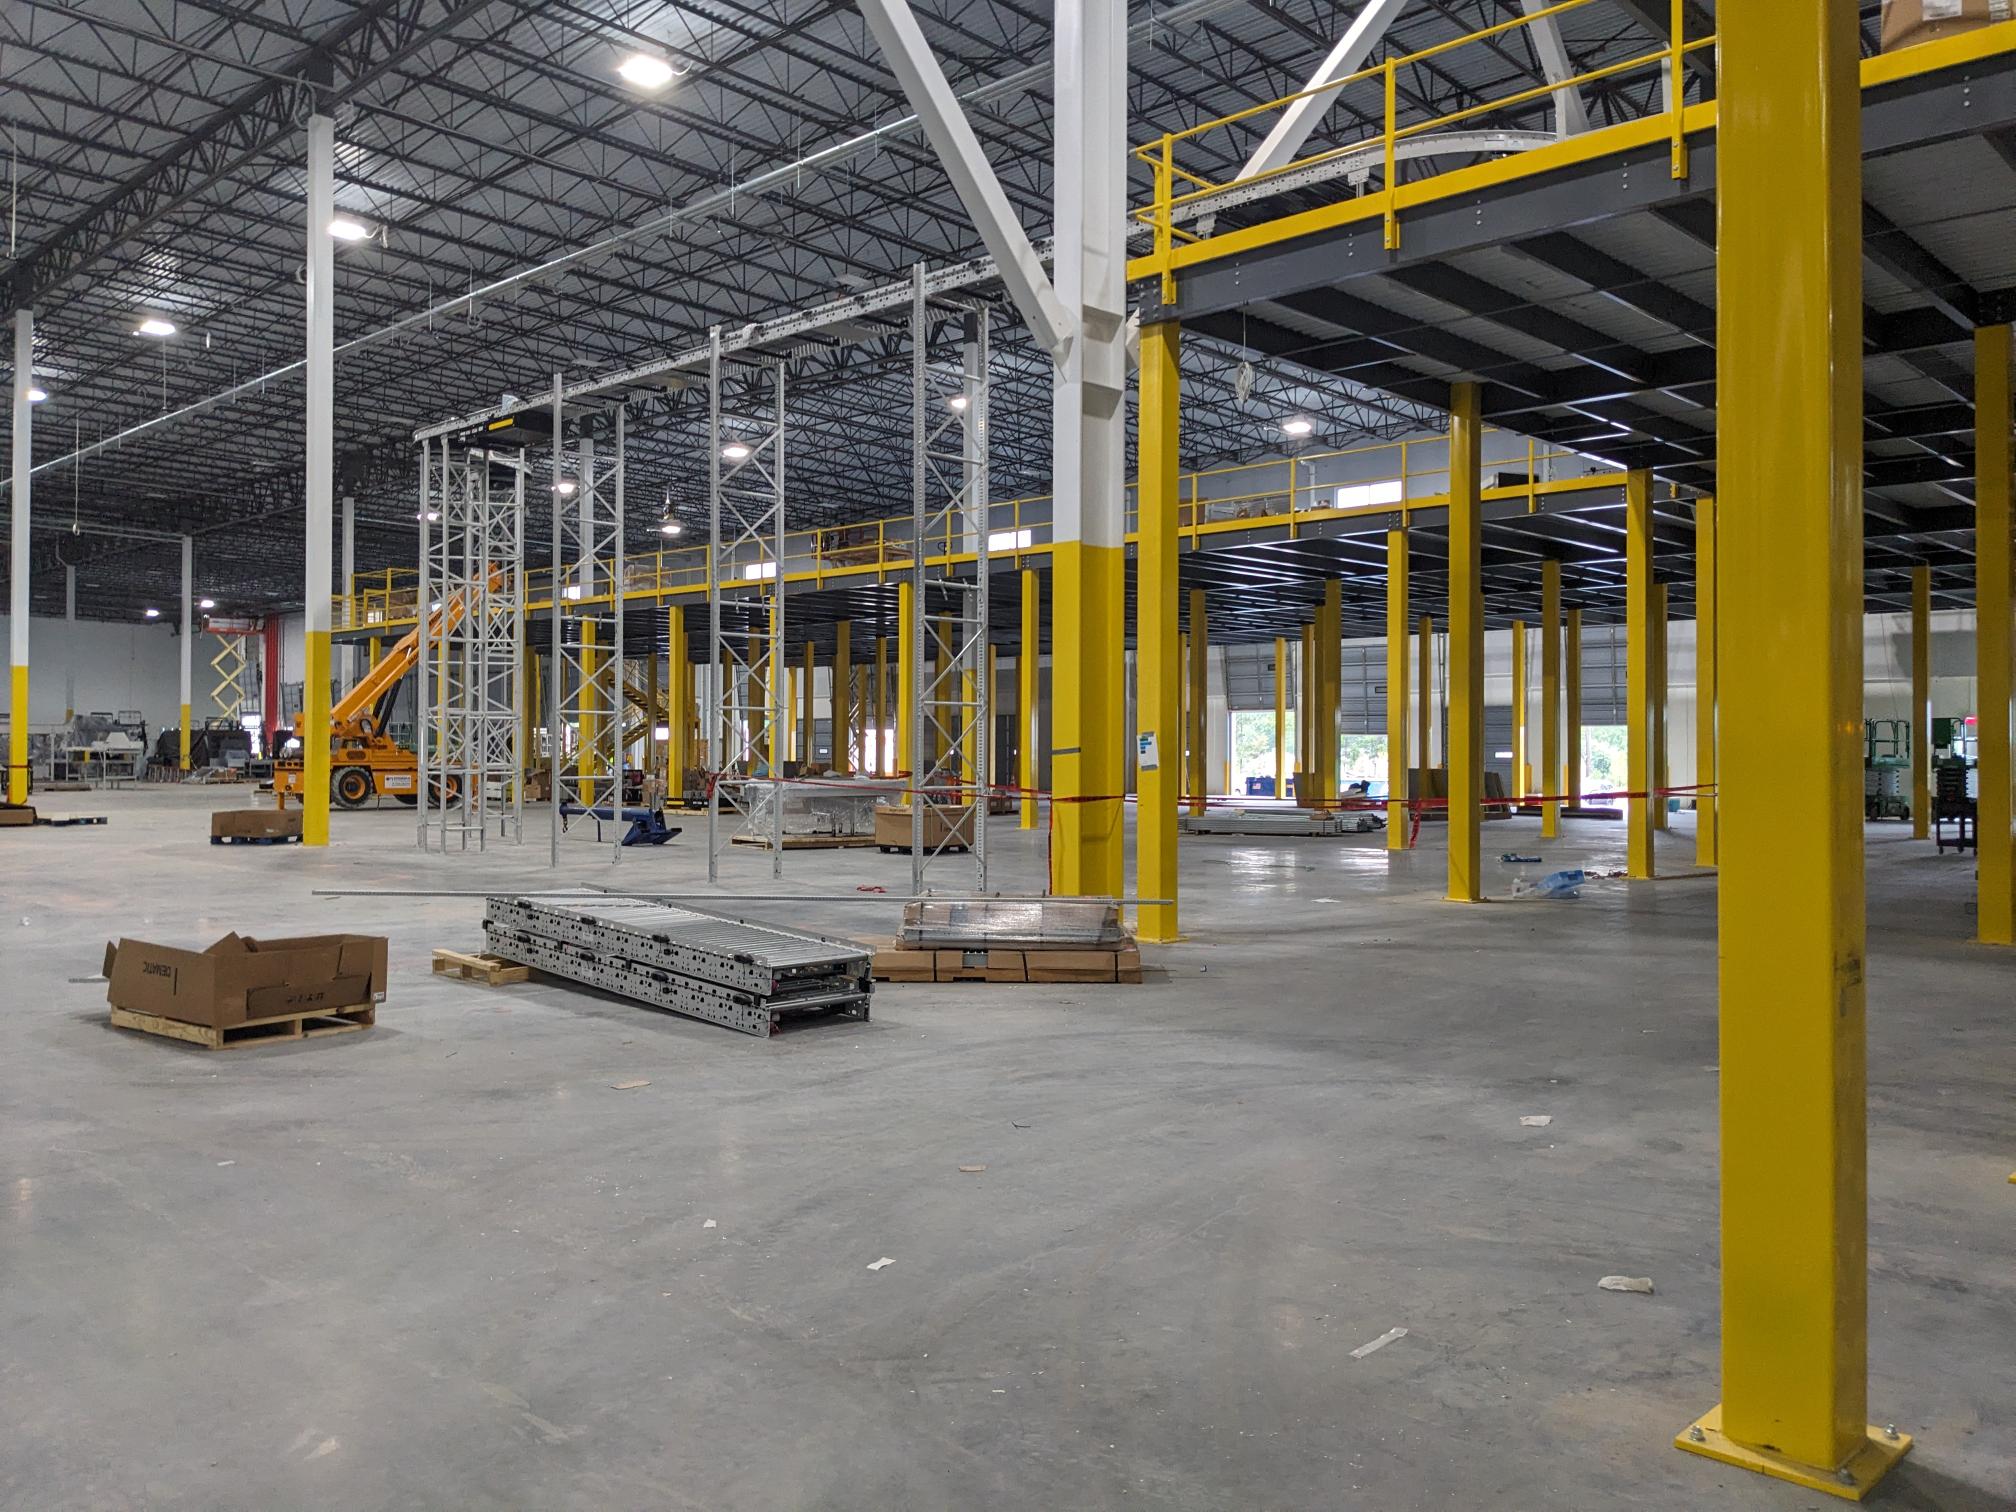 An interior view of Prologis Riverview West Warehouse.